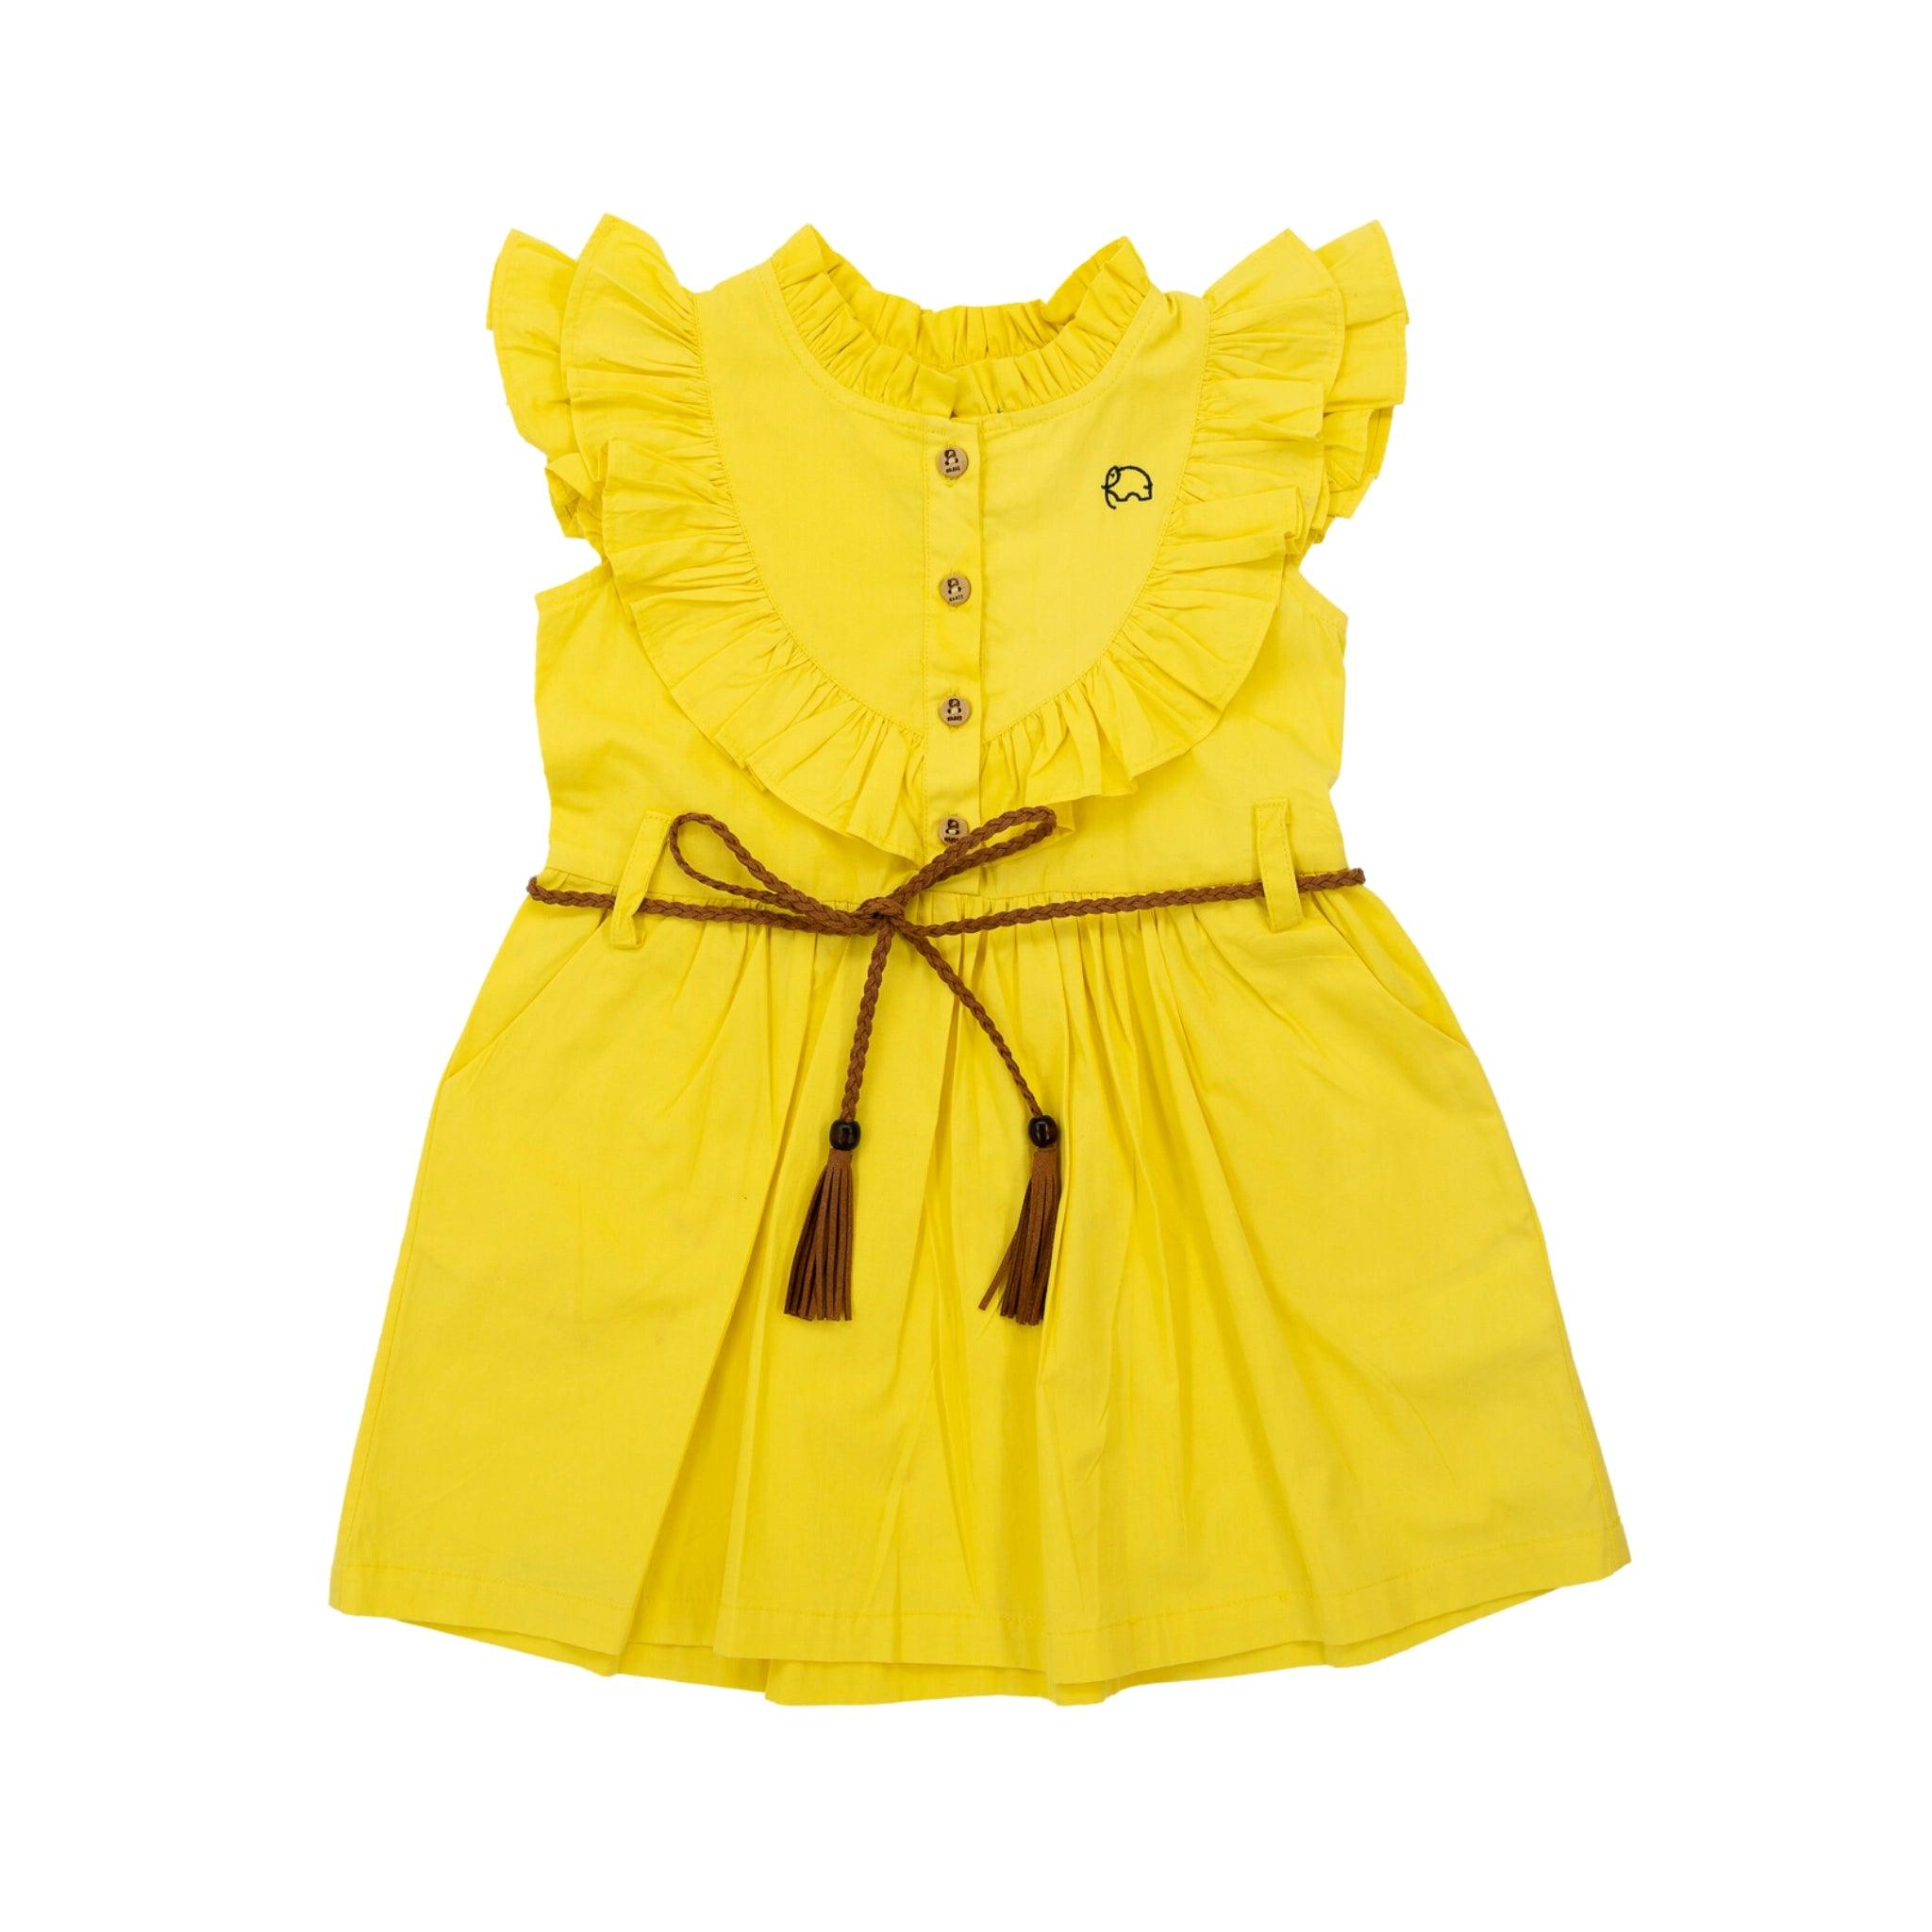 A Karee yellow Butterfly Sleeve Cotton Dress for Girls with ruffles and tassels, perfect for making a fashionable statement.